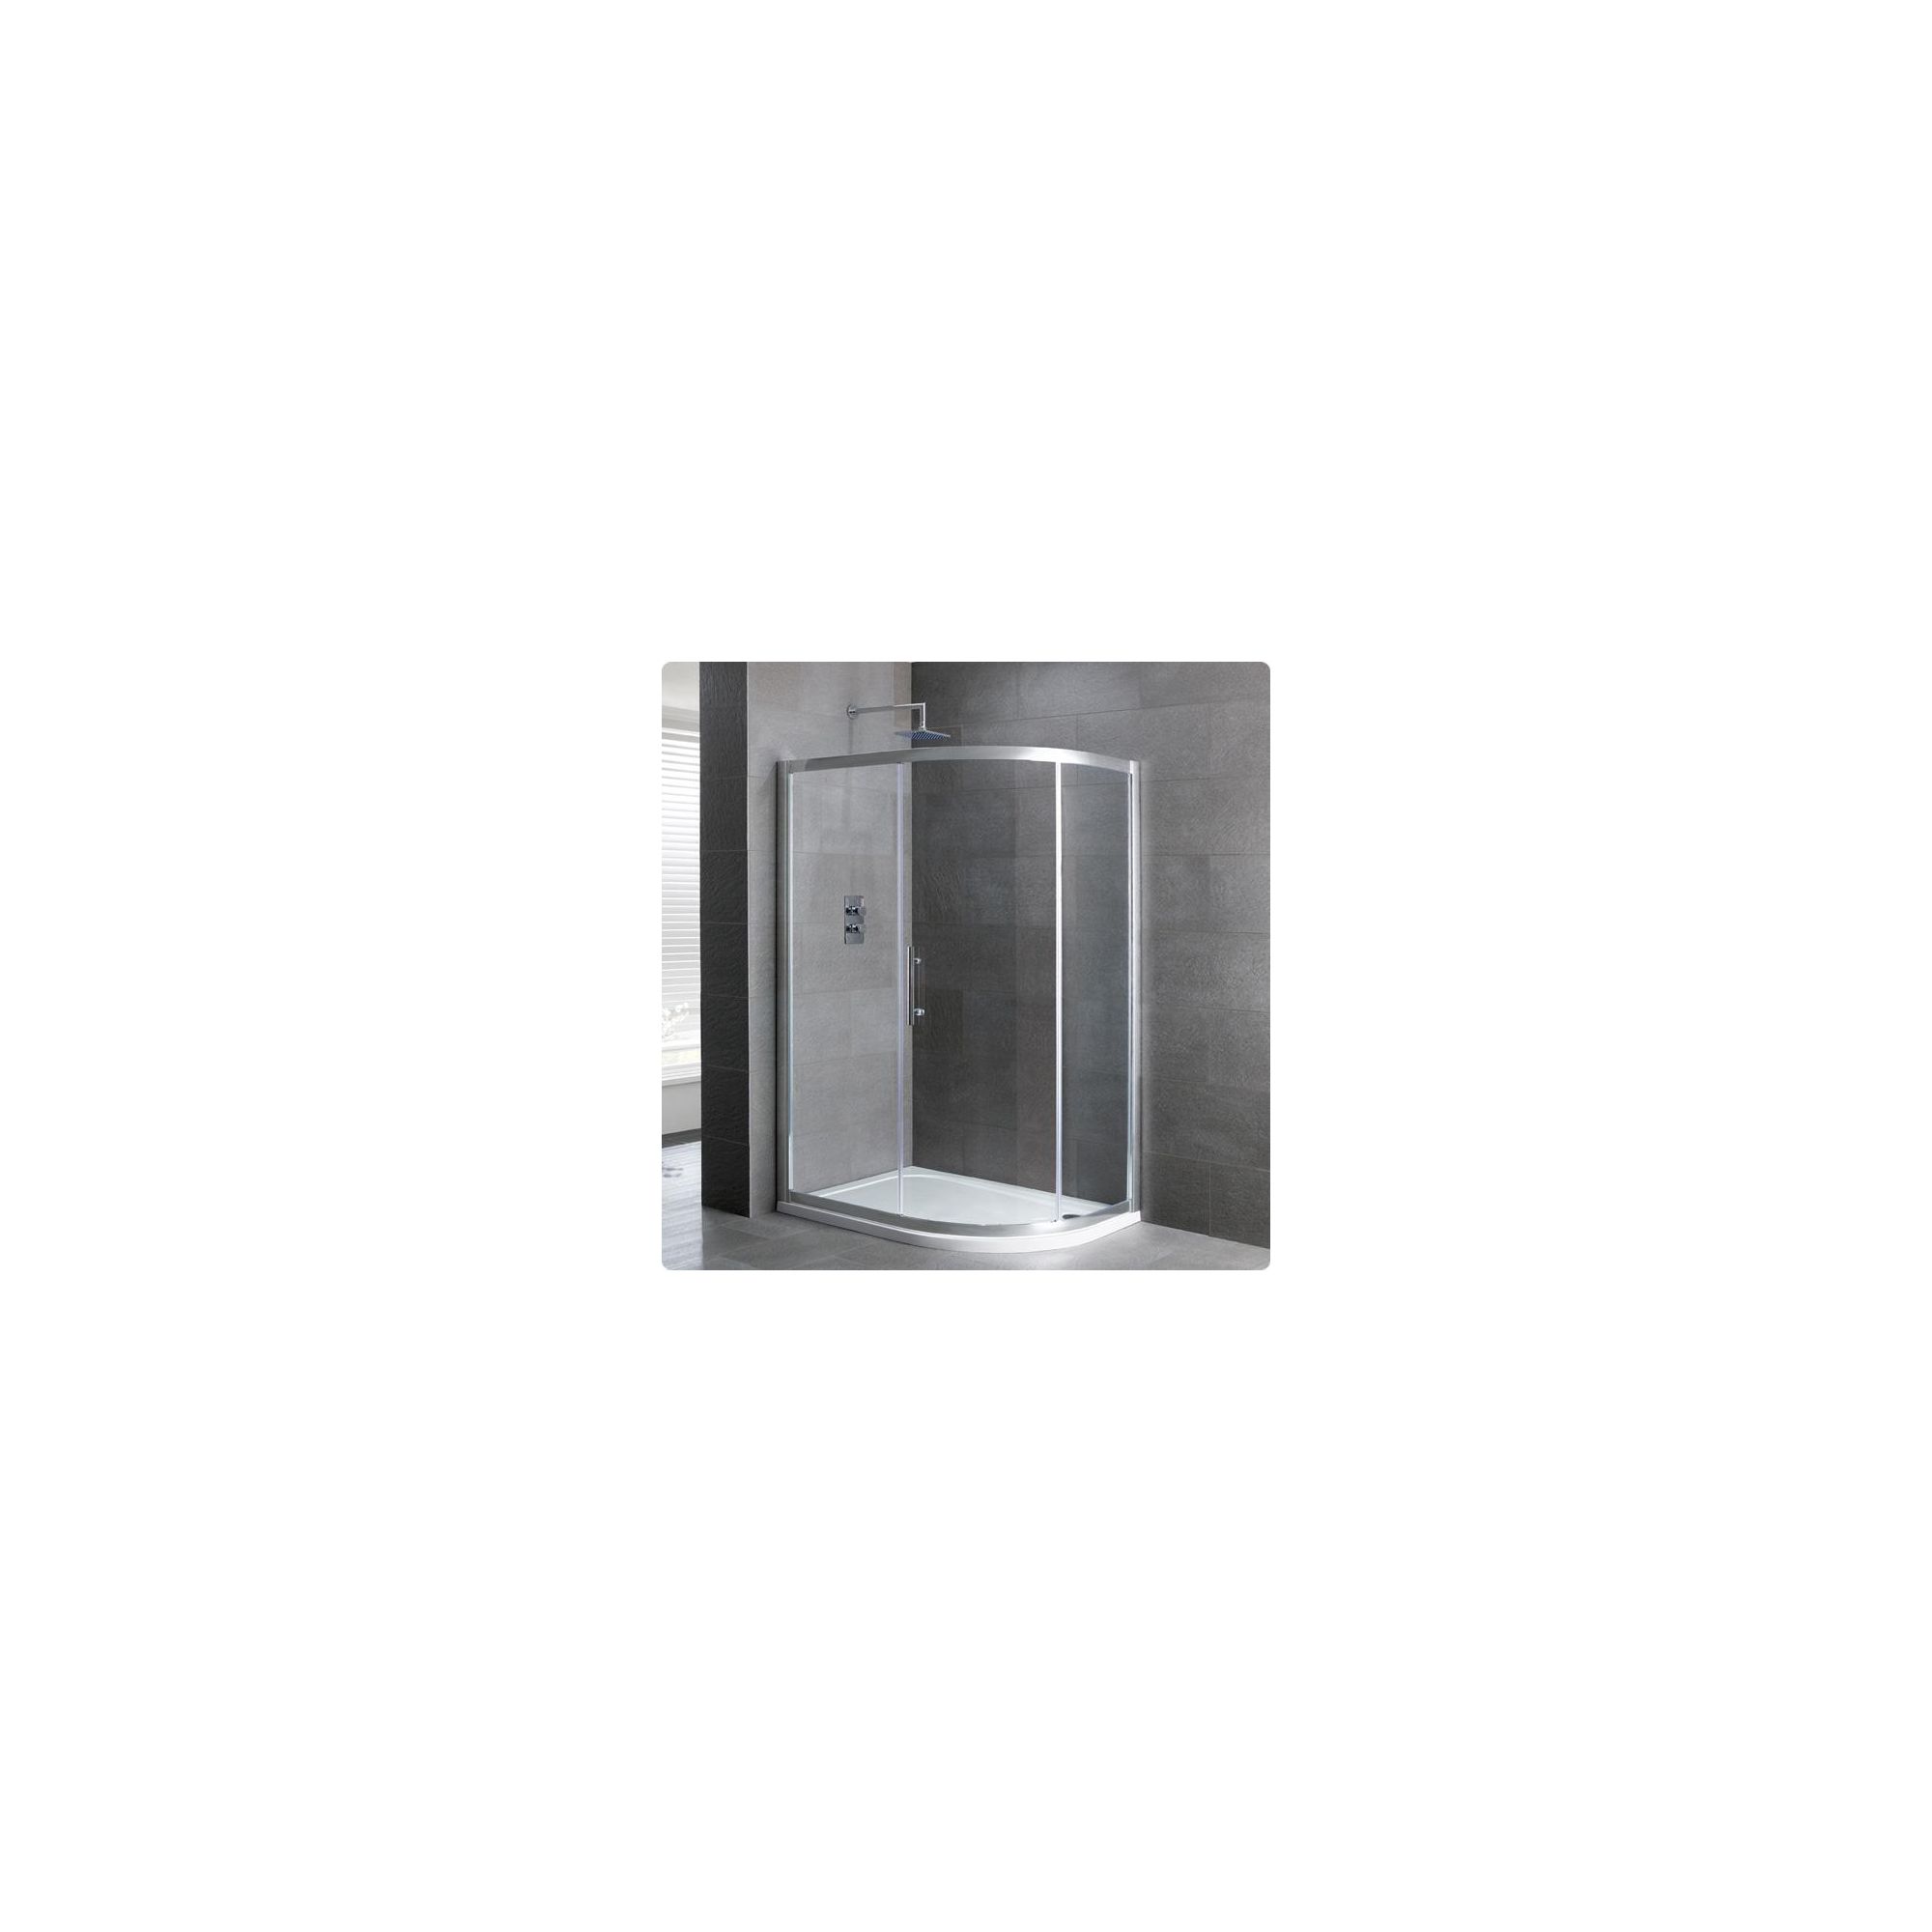 Duchy Select Silver 1 Door Offset Quadrant Shower Enclosure 1000mm x 900mm, Standard Tray, 6mm Glass at Tescos Direct